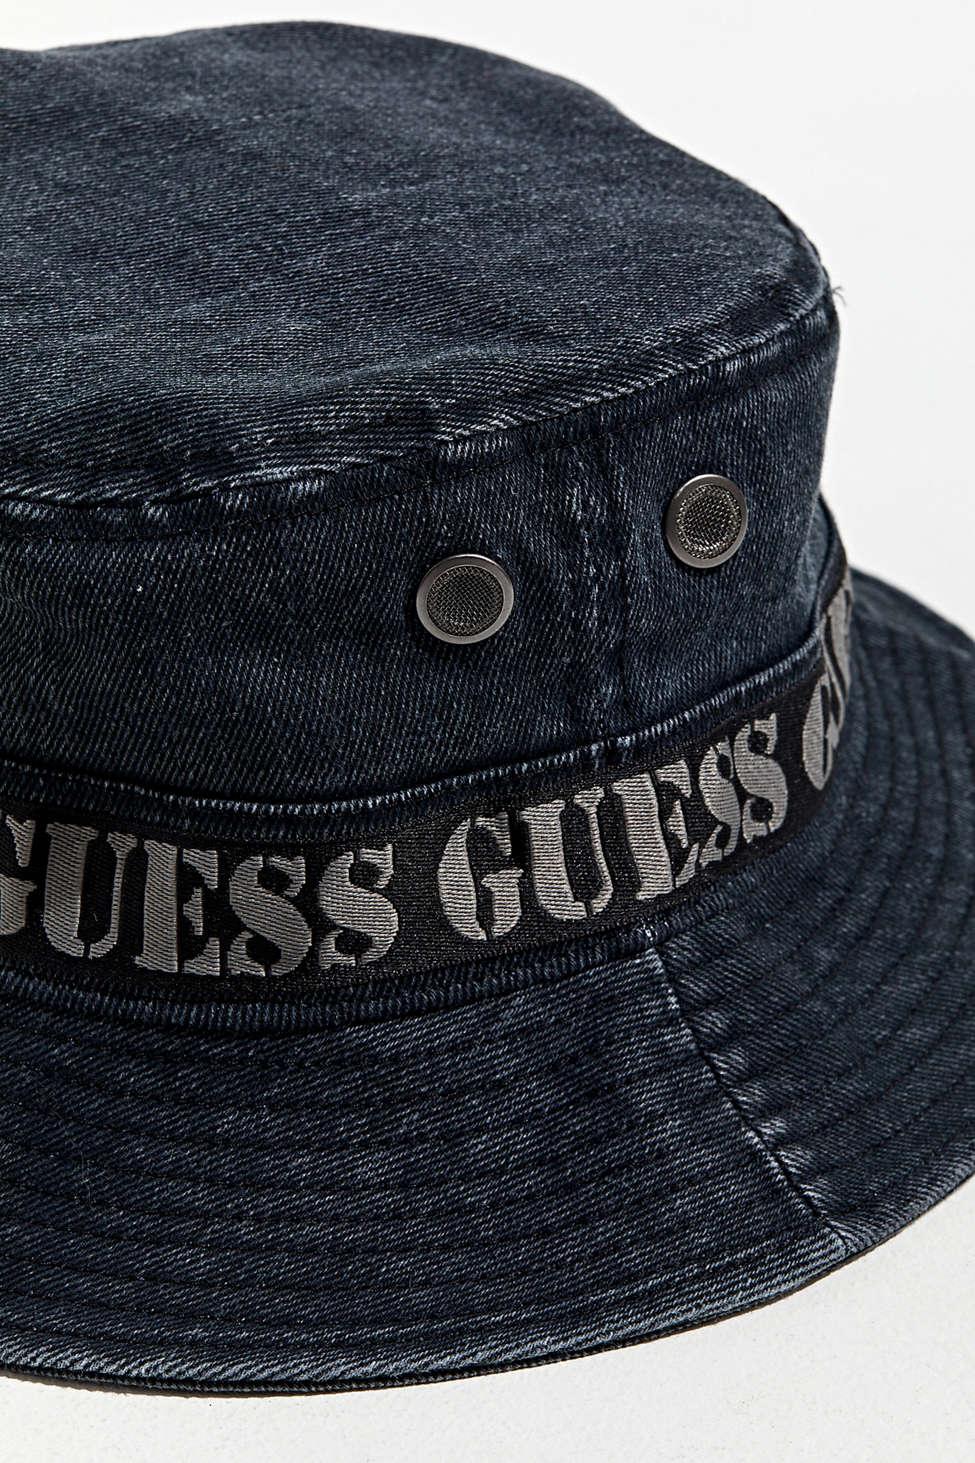 Guess Cotton Guess X 88rising Hat in Blue for Men -